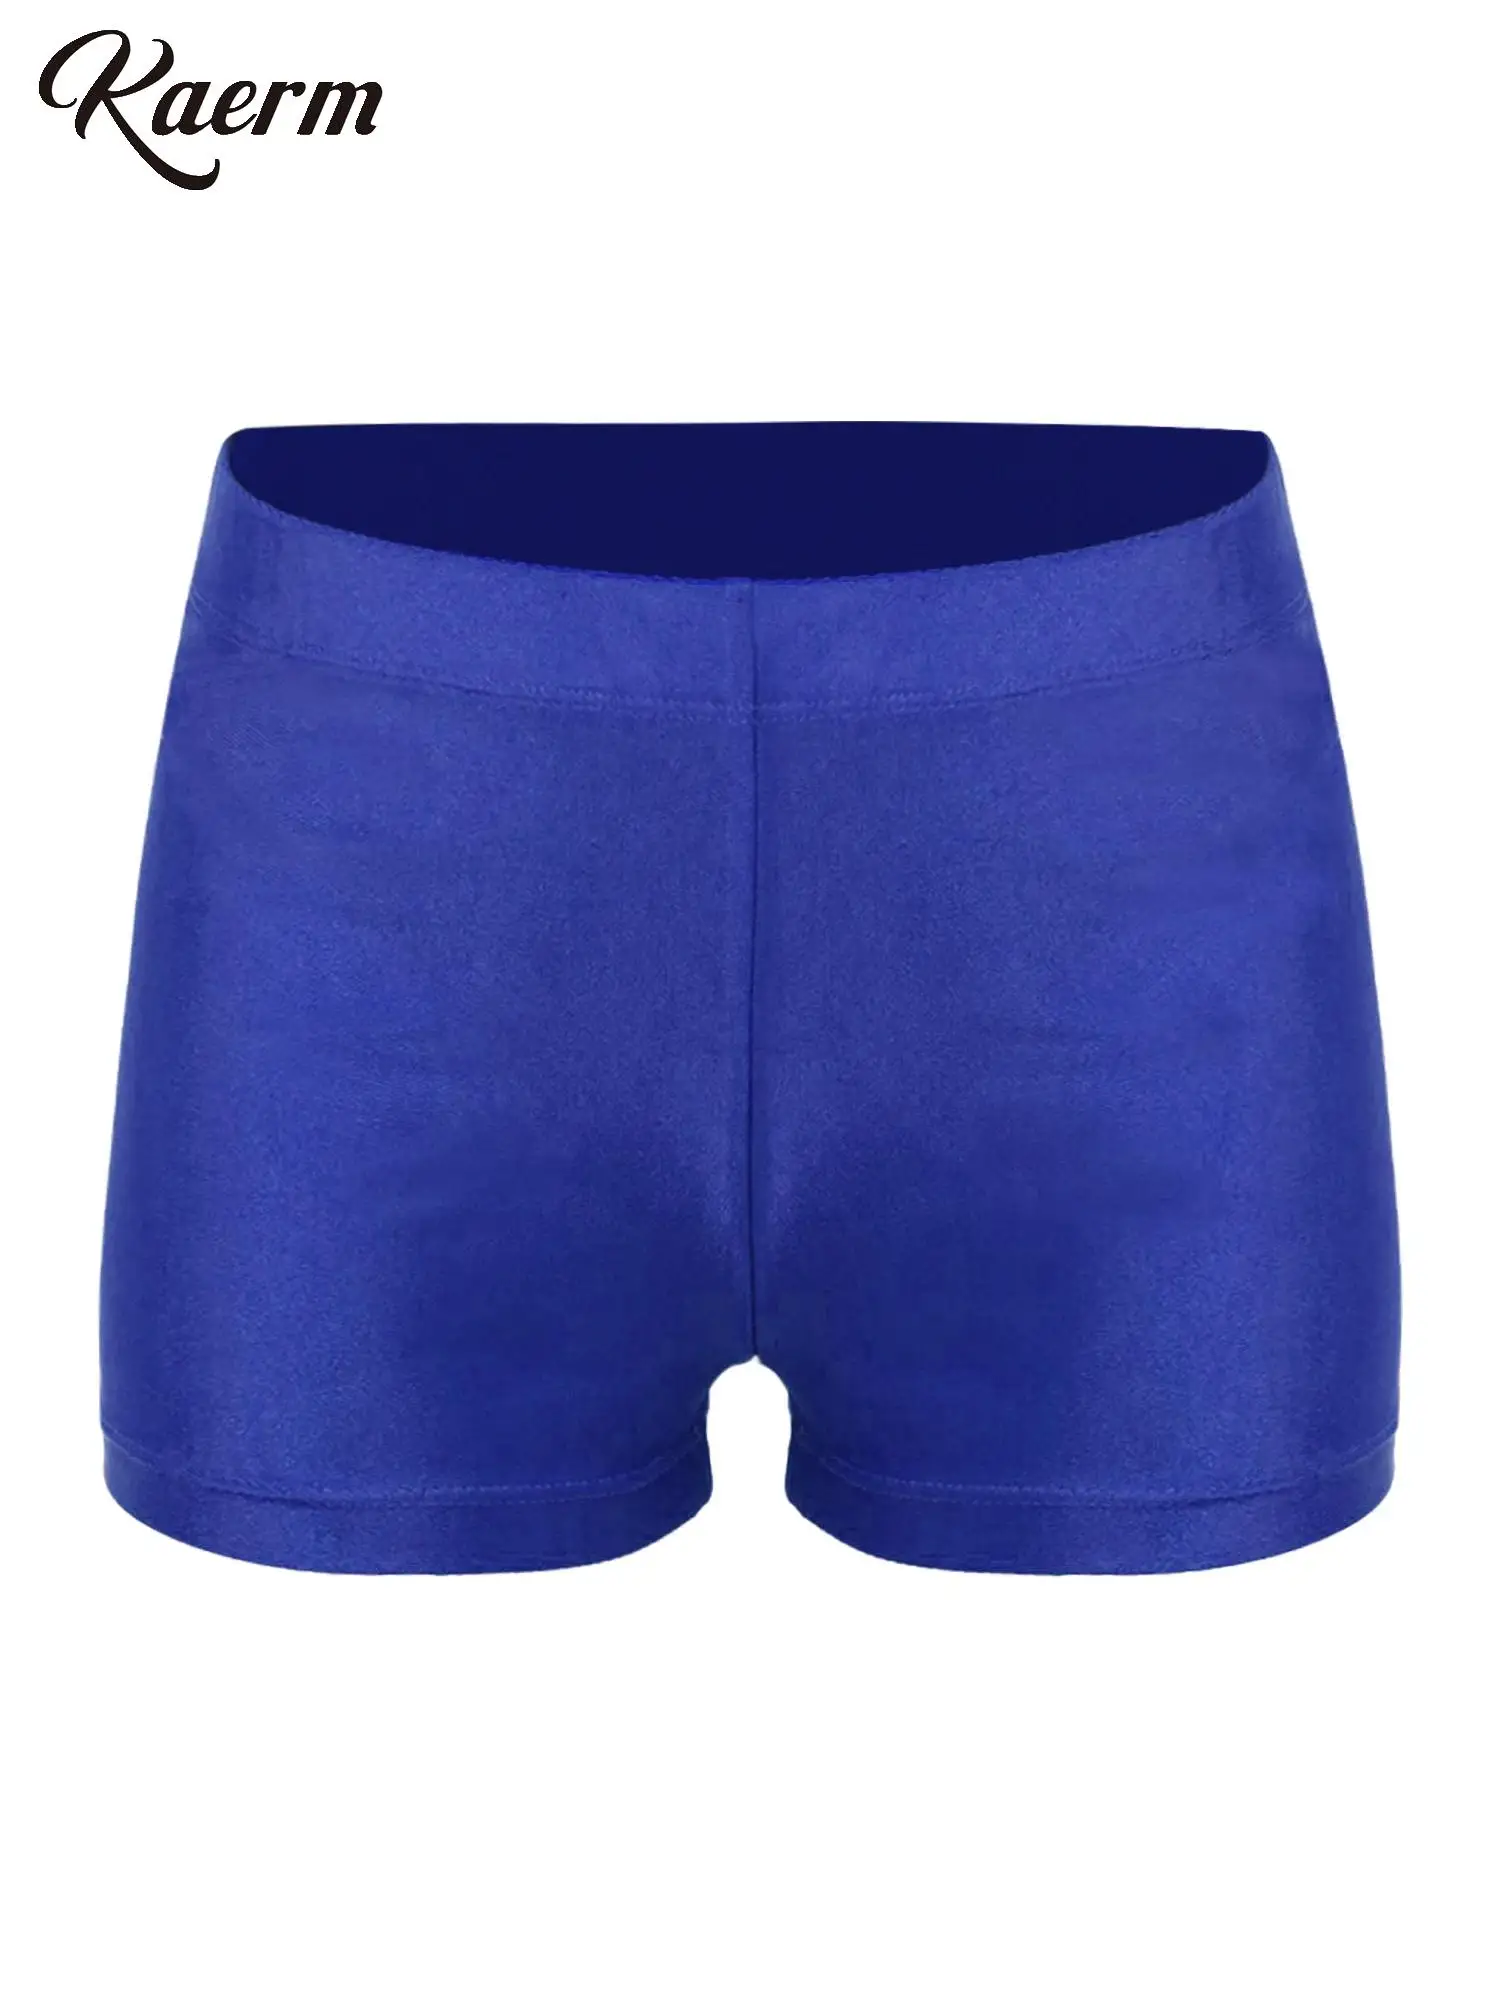 

Kids Boys Gymnastics Sport Shorts Elastic Waistband Solid Color High Stretchy Shorts Costumes for Workout Training Competition